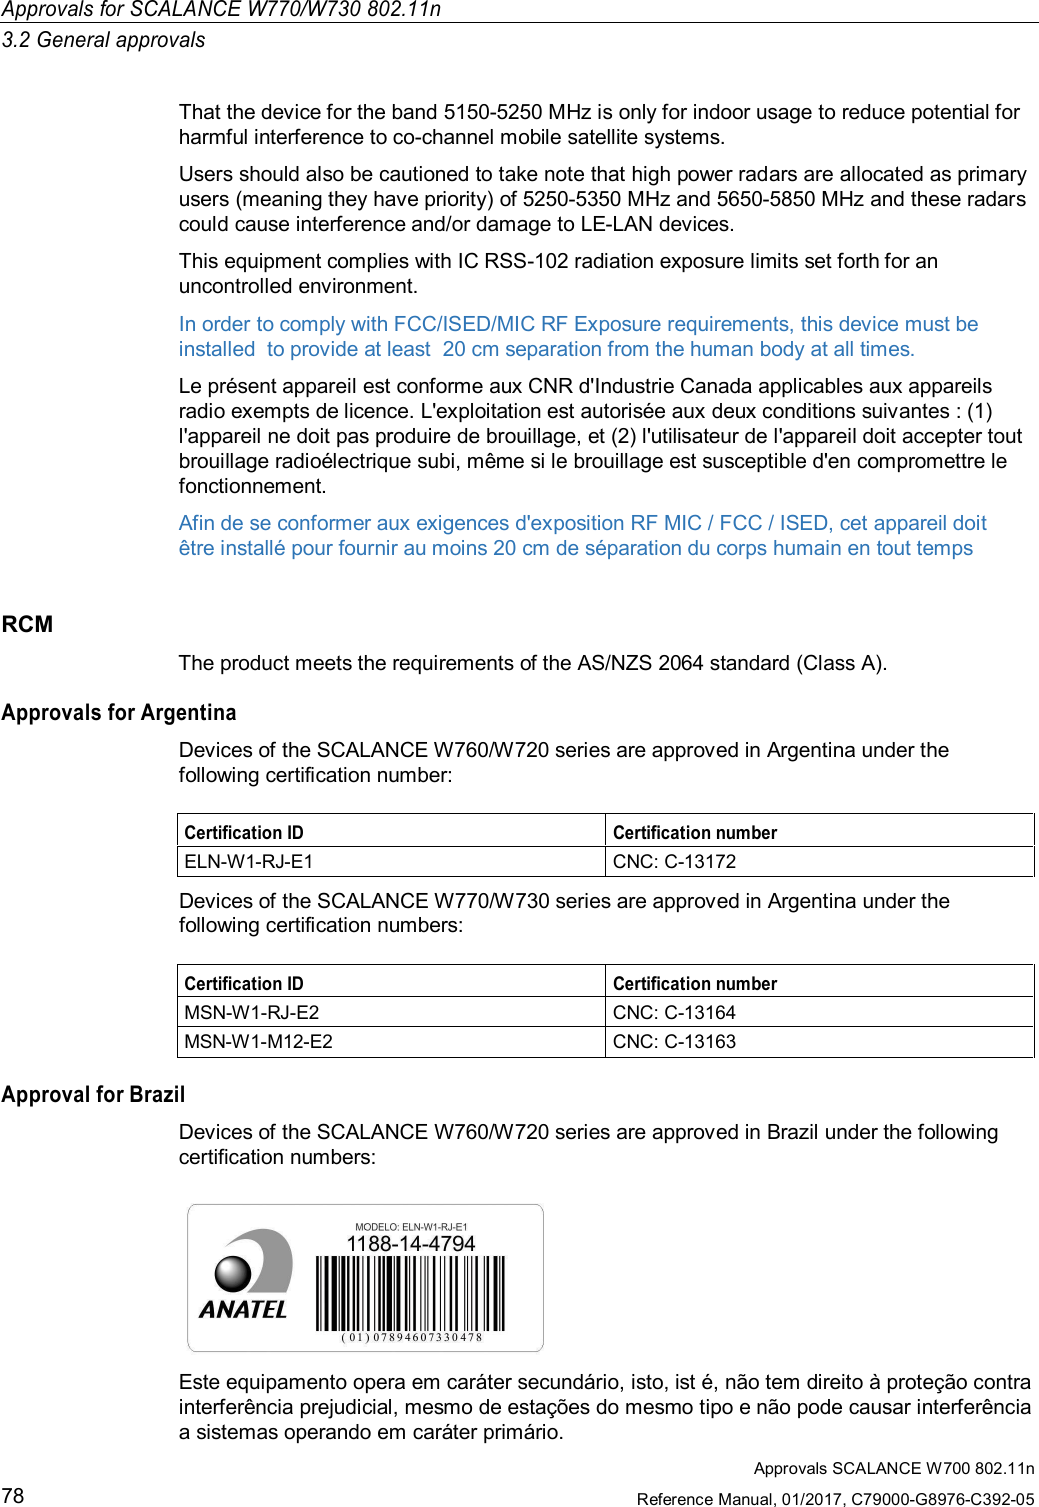 Approvals SCALANCE W700 802.11nReference Manual, 01/2017, C79000-G8976-C392-0578Approvals for SCALANCE W770/W730 802.11n3.2 General approvalsThat the device for the band 5150-5250 MHz is only for indoor usage to reduce potential forharmful interference to co-channel mobile satellite systems.Users should also be cautioned to take note that high power radars are allocated as primaryusers (meaning they have priority) of 5250-5350 MHz and 5650-5850 MHz and these radarscould cause interference and/or damage to LE-LAN devices.This equipment complies with IC RSS-102 radiation exposure limits set forth for anuncontrolled environment.In order to comply with FCC/ISED/MIC RF Exposure requirements, this device must beinstalled  to provide at least  20 cm separation from the human body at all times.Le présent appareil est conforme aux CNR d&apos;Industrie Canada applicables aux appareilsradio exempts de licence. L&apos;exploitation est autorisée aux deux conditions suivantes : (1)l&apos;appareil ne doit pas produire de brouillage, et (2) l&apos;utilisateur de l&apos;appareil doit accepter toutbrouillage radioélectrique subi, même si le brouillage est susceptible d&apos;en compromettre lefonctionnement.Afin de se conformer aux exigences d&apos;exposition RF MIC / FCC / ISED, cet appareil doitêtre installé pour fournir au moins 20 cm de séparation du corps humain en tout tempsRCMThe product meets the requirements of the AS/NZS 2064 standard (Class A).Approvals for ArgentinaDevices of the SCALANCE W760/W720 series are approved in Argentina under thefollowing certification number:Certification ID Certification numberELN-W1-RJ-E1 CNC: C-13172Devices of the SCALANCE W770/W730 series are approved in Argentina under thefollowing certification numbers:Certification ID Certification numberMSN-W1-RJ-E2 CNC: C-13164MSN-W1-M12-E2 CNC: C-13163Approval for BrazilDevices of the SCALANCE W760/W720 series are approved in Brazil under the followingcertification numbers:Este equipamento opera em caráter secundário, isto, ist é, não tem direito à proteção contrainterferência prejudicial, mesmo de estações do mesmo tipo e não pode causar interferênciaa sistemas operando em caráter primário.